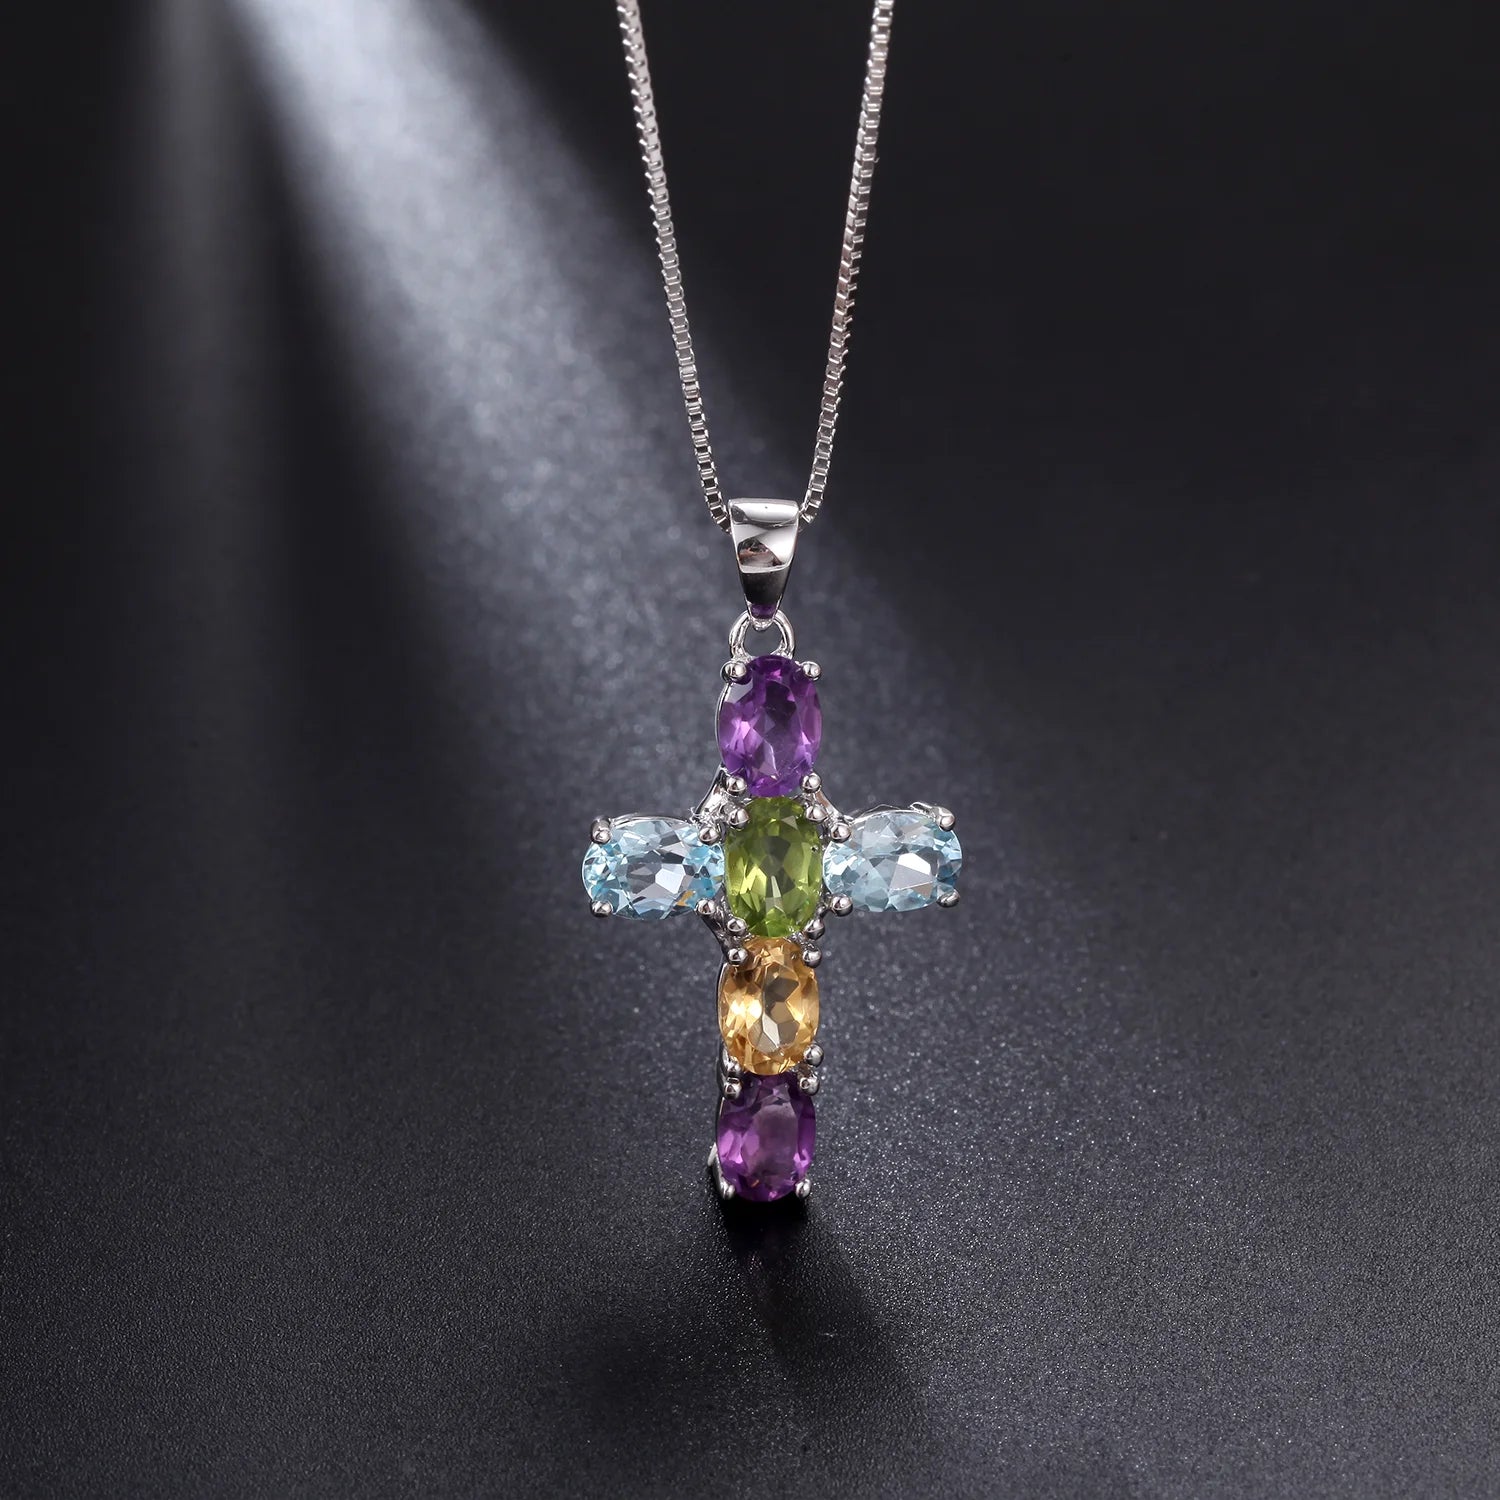 GEM'S BALLET 925 Sterling Silver Cross Necklace For Women Natural Amethyst Topaz Gemstone Pendant Necklace Fine Jewelry 2021 NEW